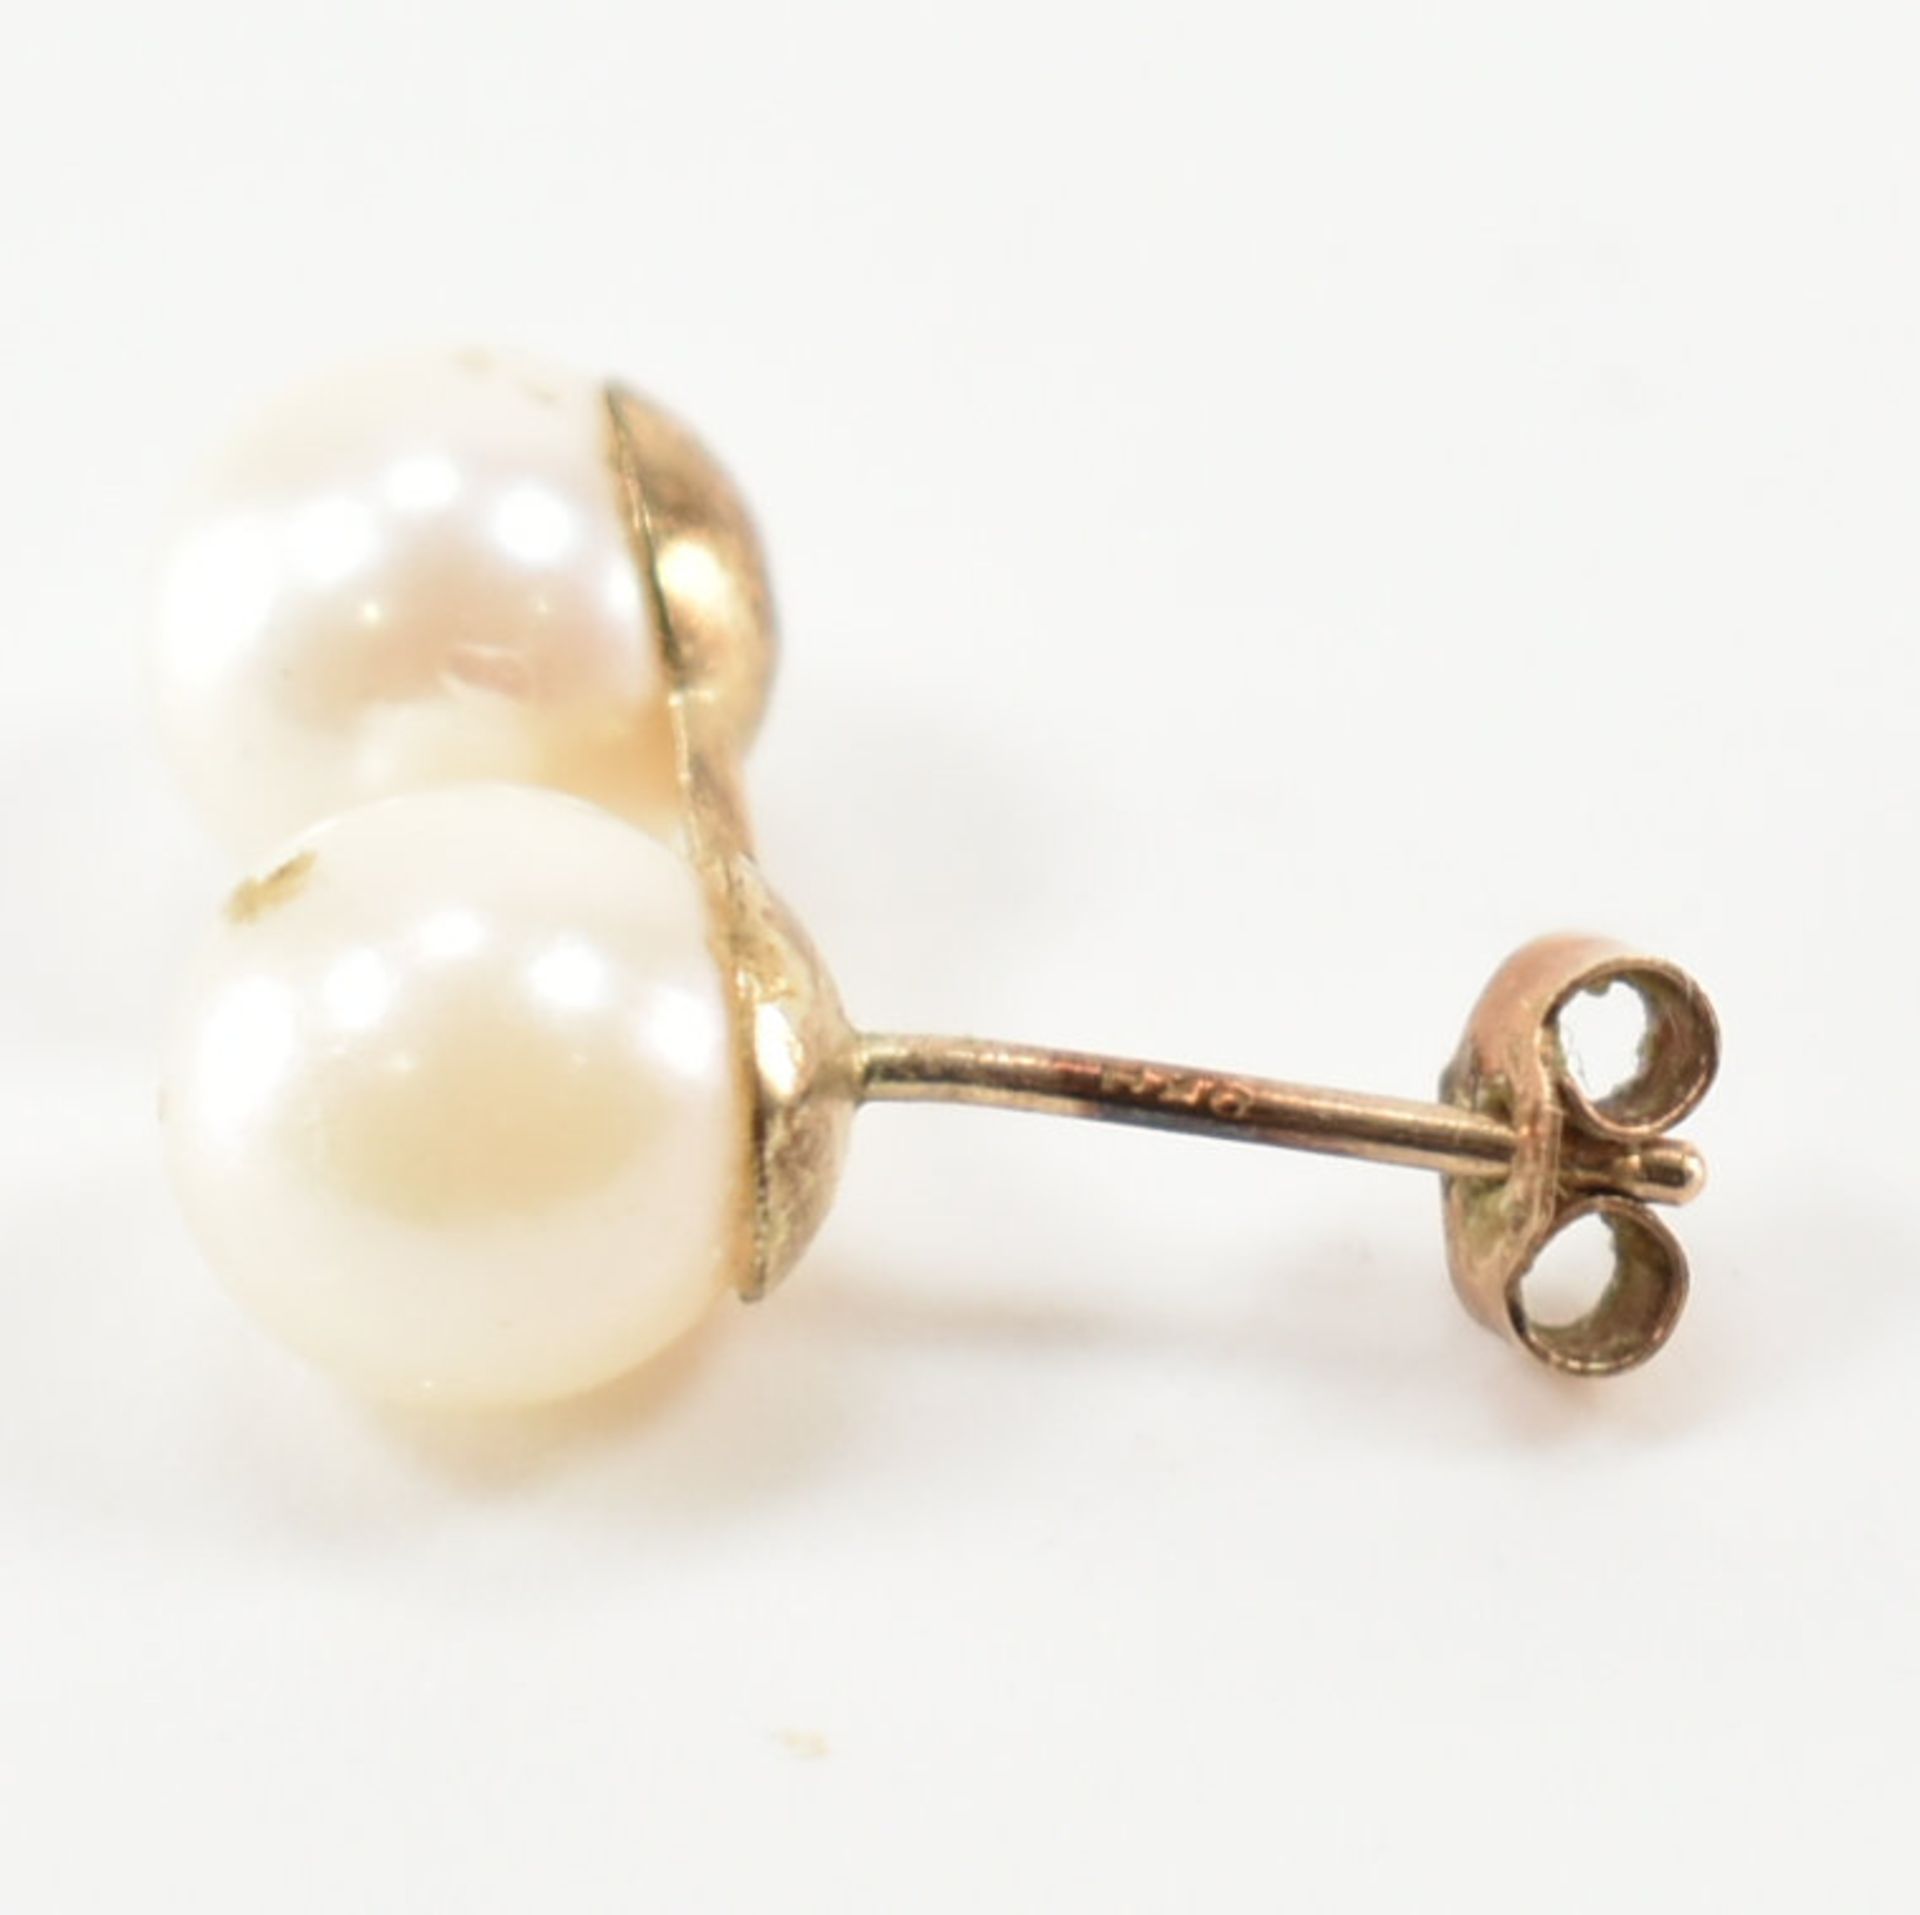 COLLECTION OF ASSORTED GOLD & PEARL STUD EARRINGS - Image 4 of 4